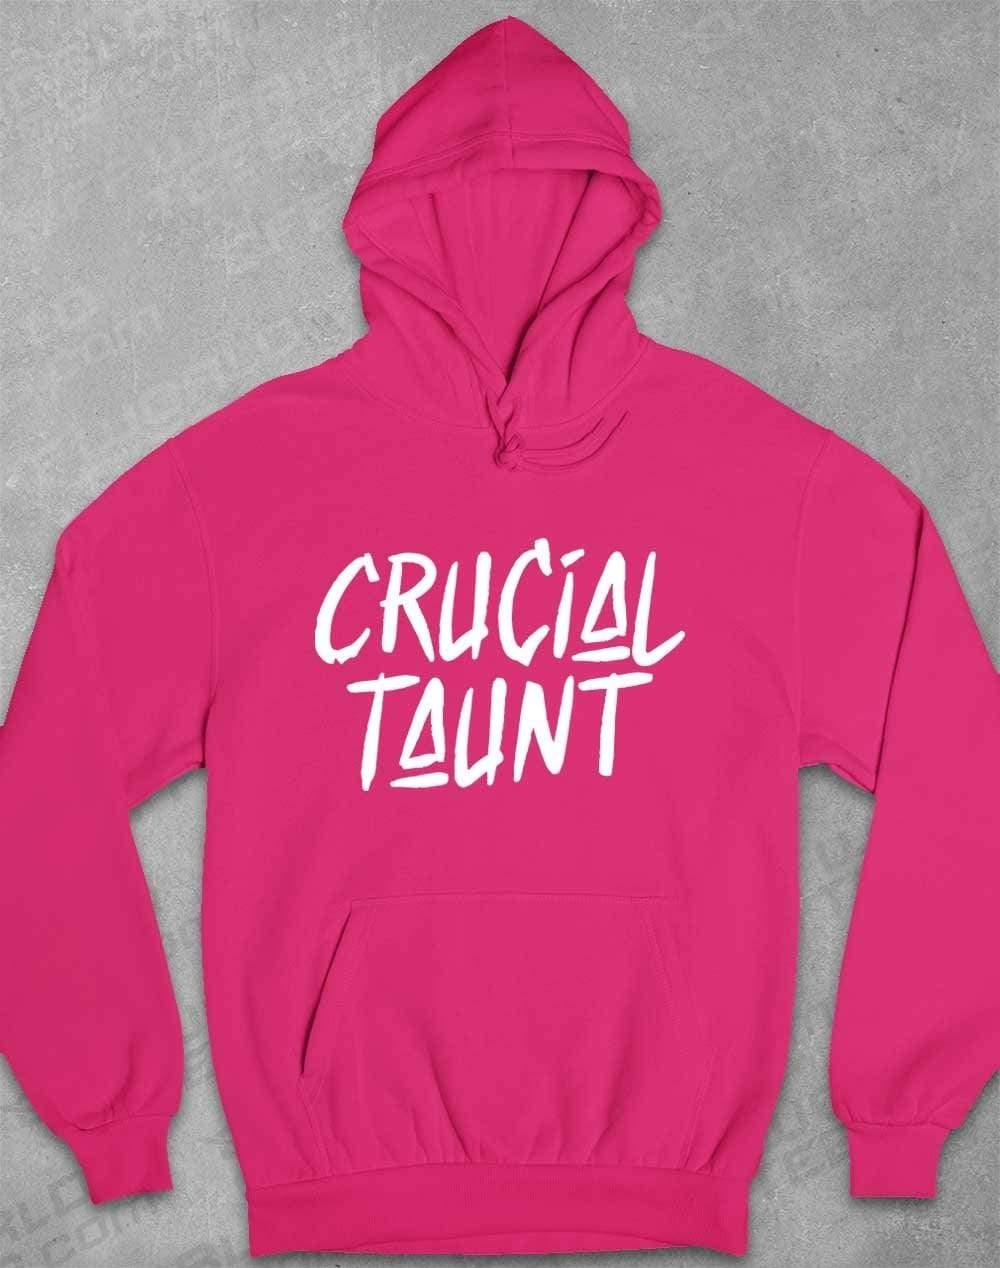 Crucial Taunt Hoodie XS / Hot Pink  - Off World Tees